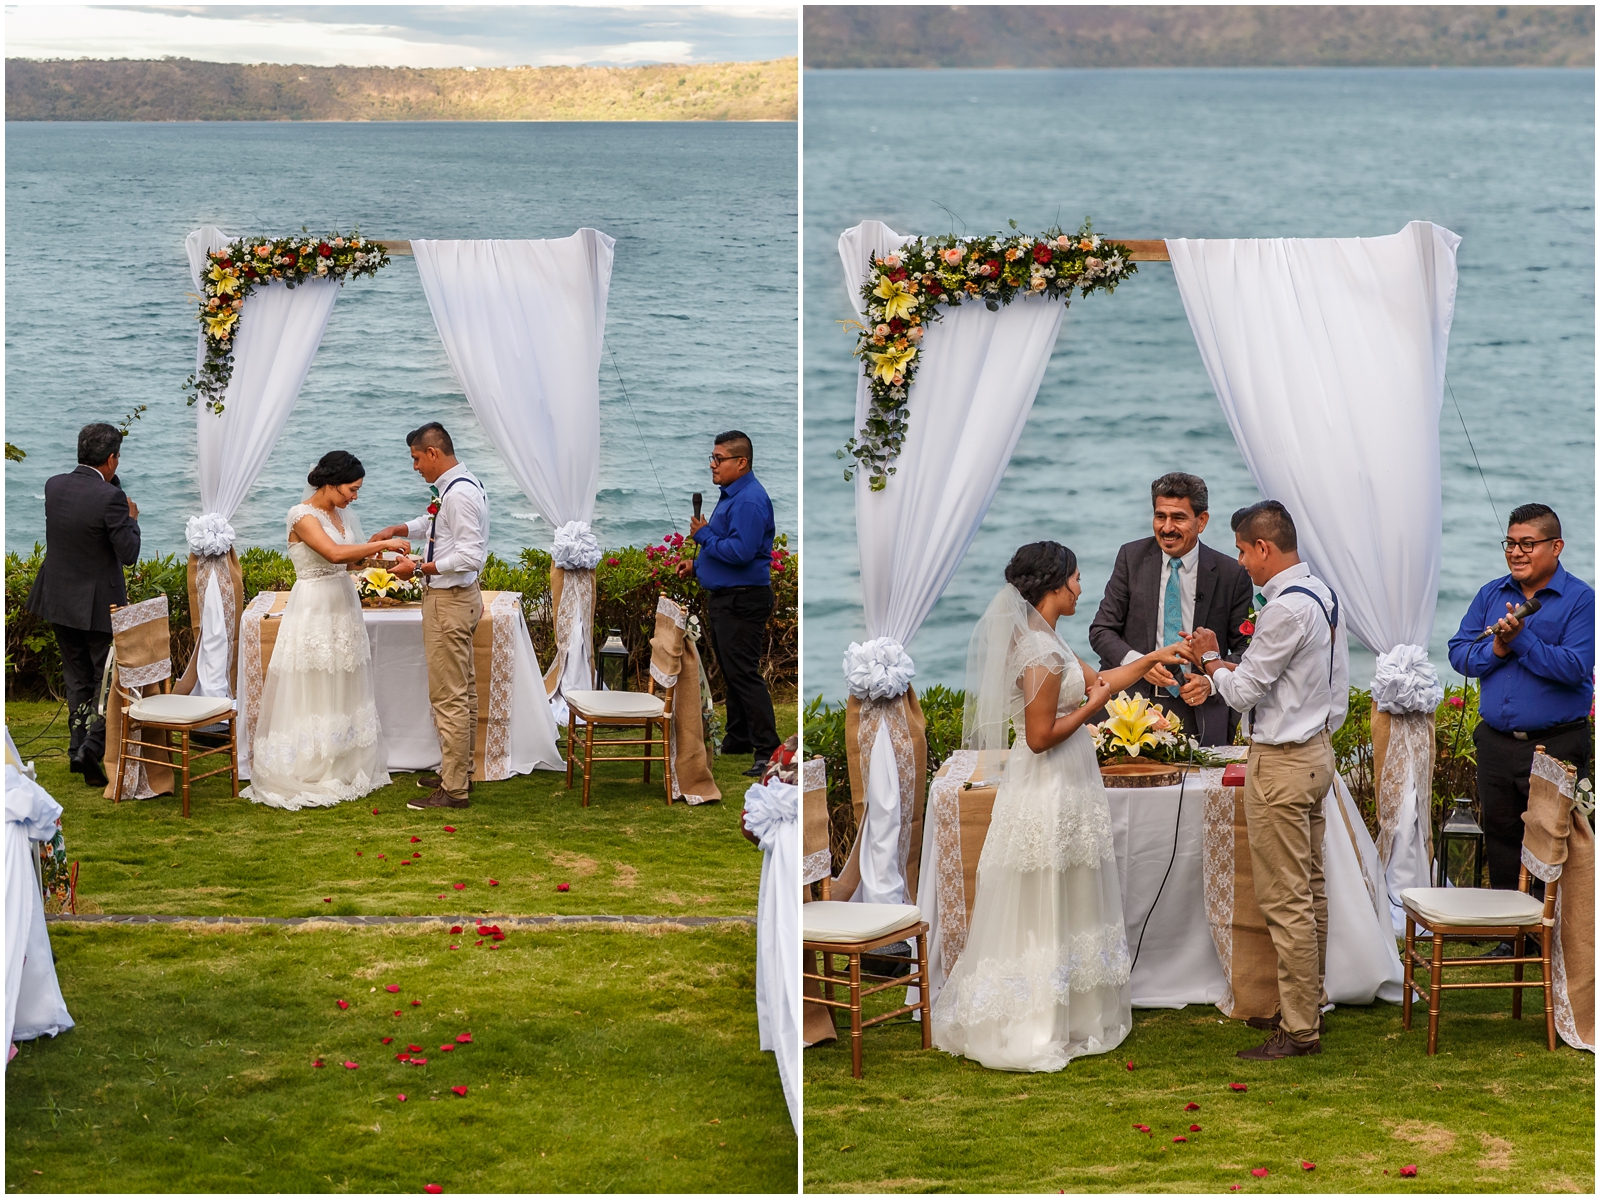 Intimate wedding ceremony on a lake in Nicaragua.